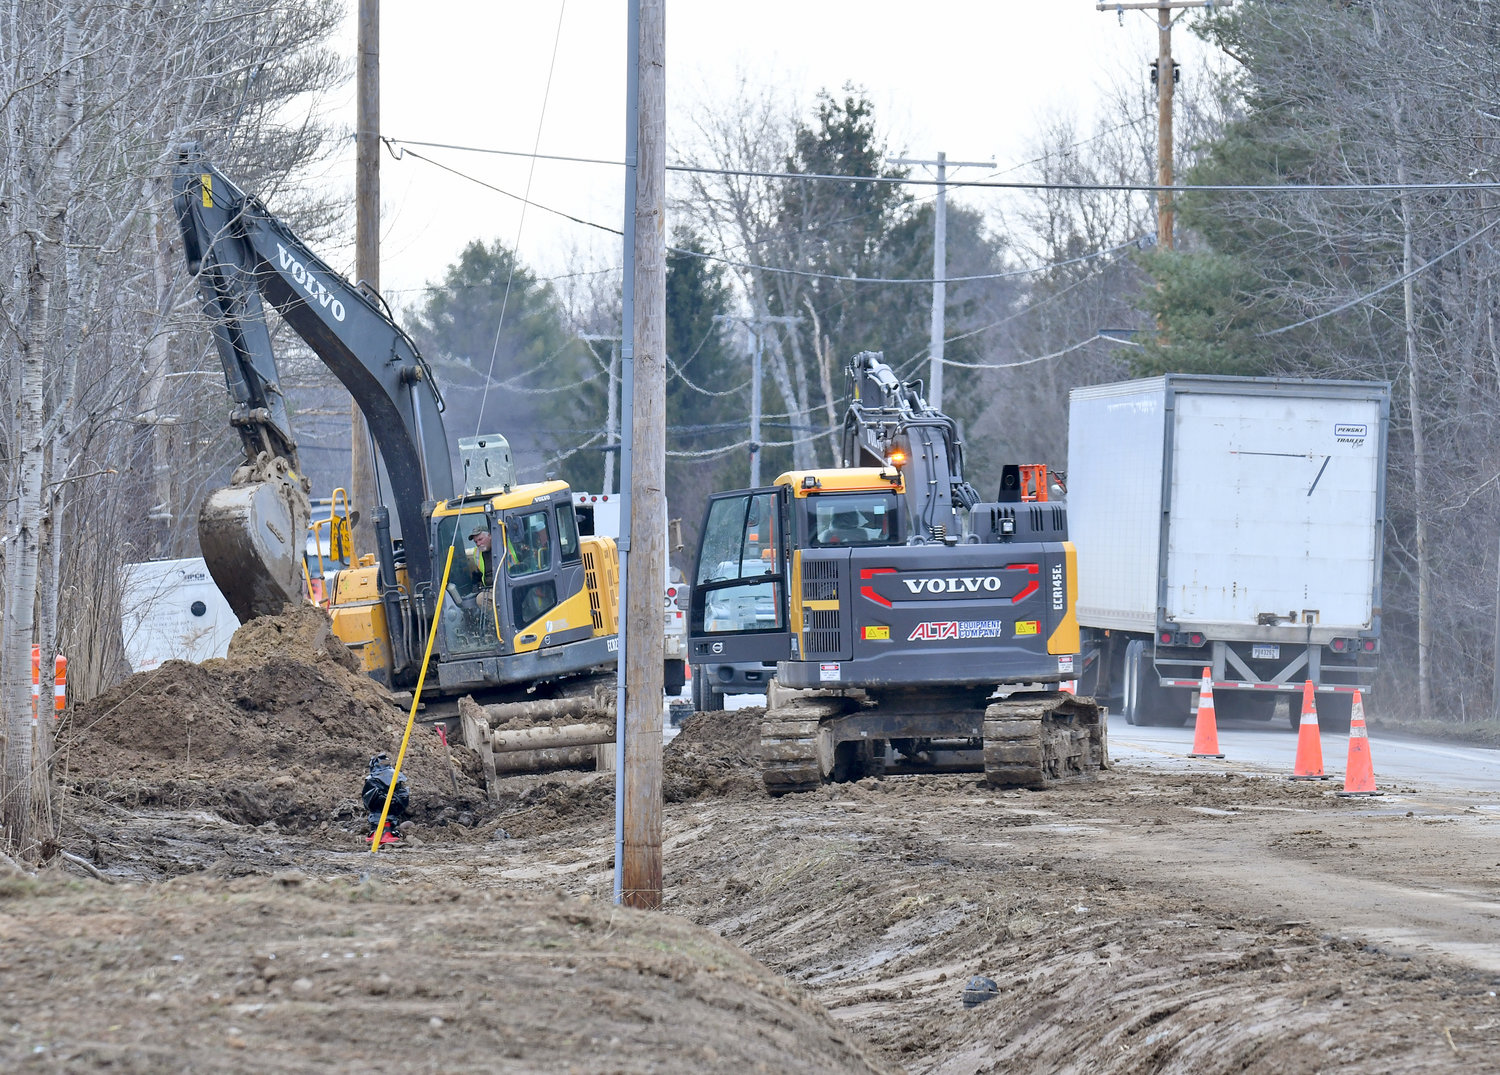 Water work continues on Route 46/49 near Fort Rickey Children’s Discovery Zoo on Wednesday, Jan. 11. Verona town officials say work is progressing on project that will provide municipal water to about 500 town residents as well as install fire hydrants in some areas in the town, including New London.